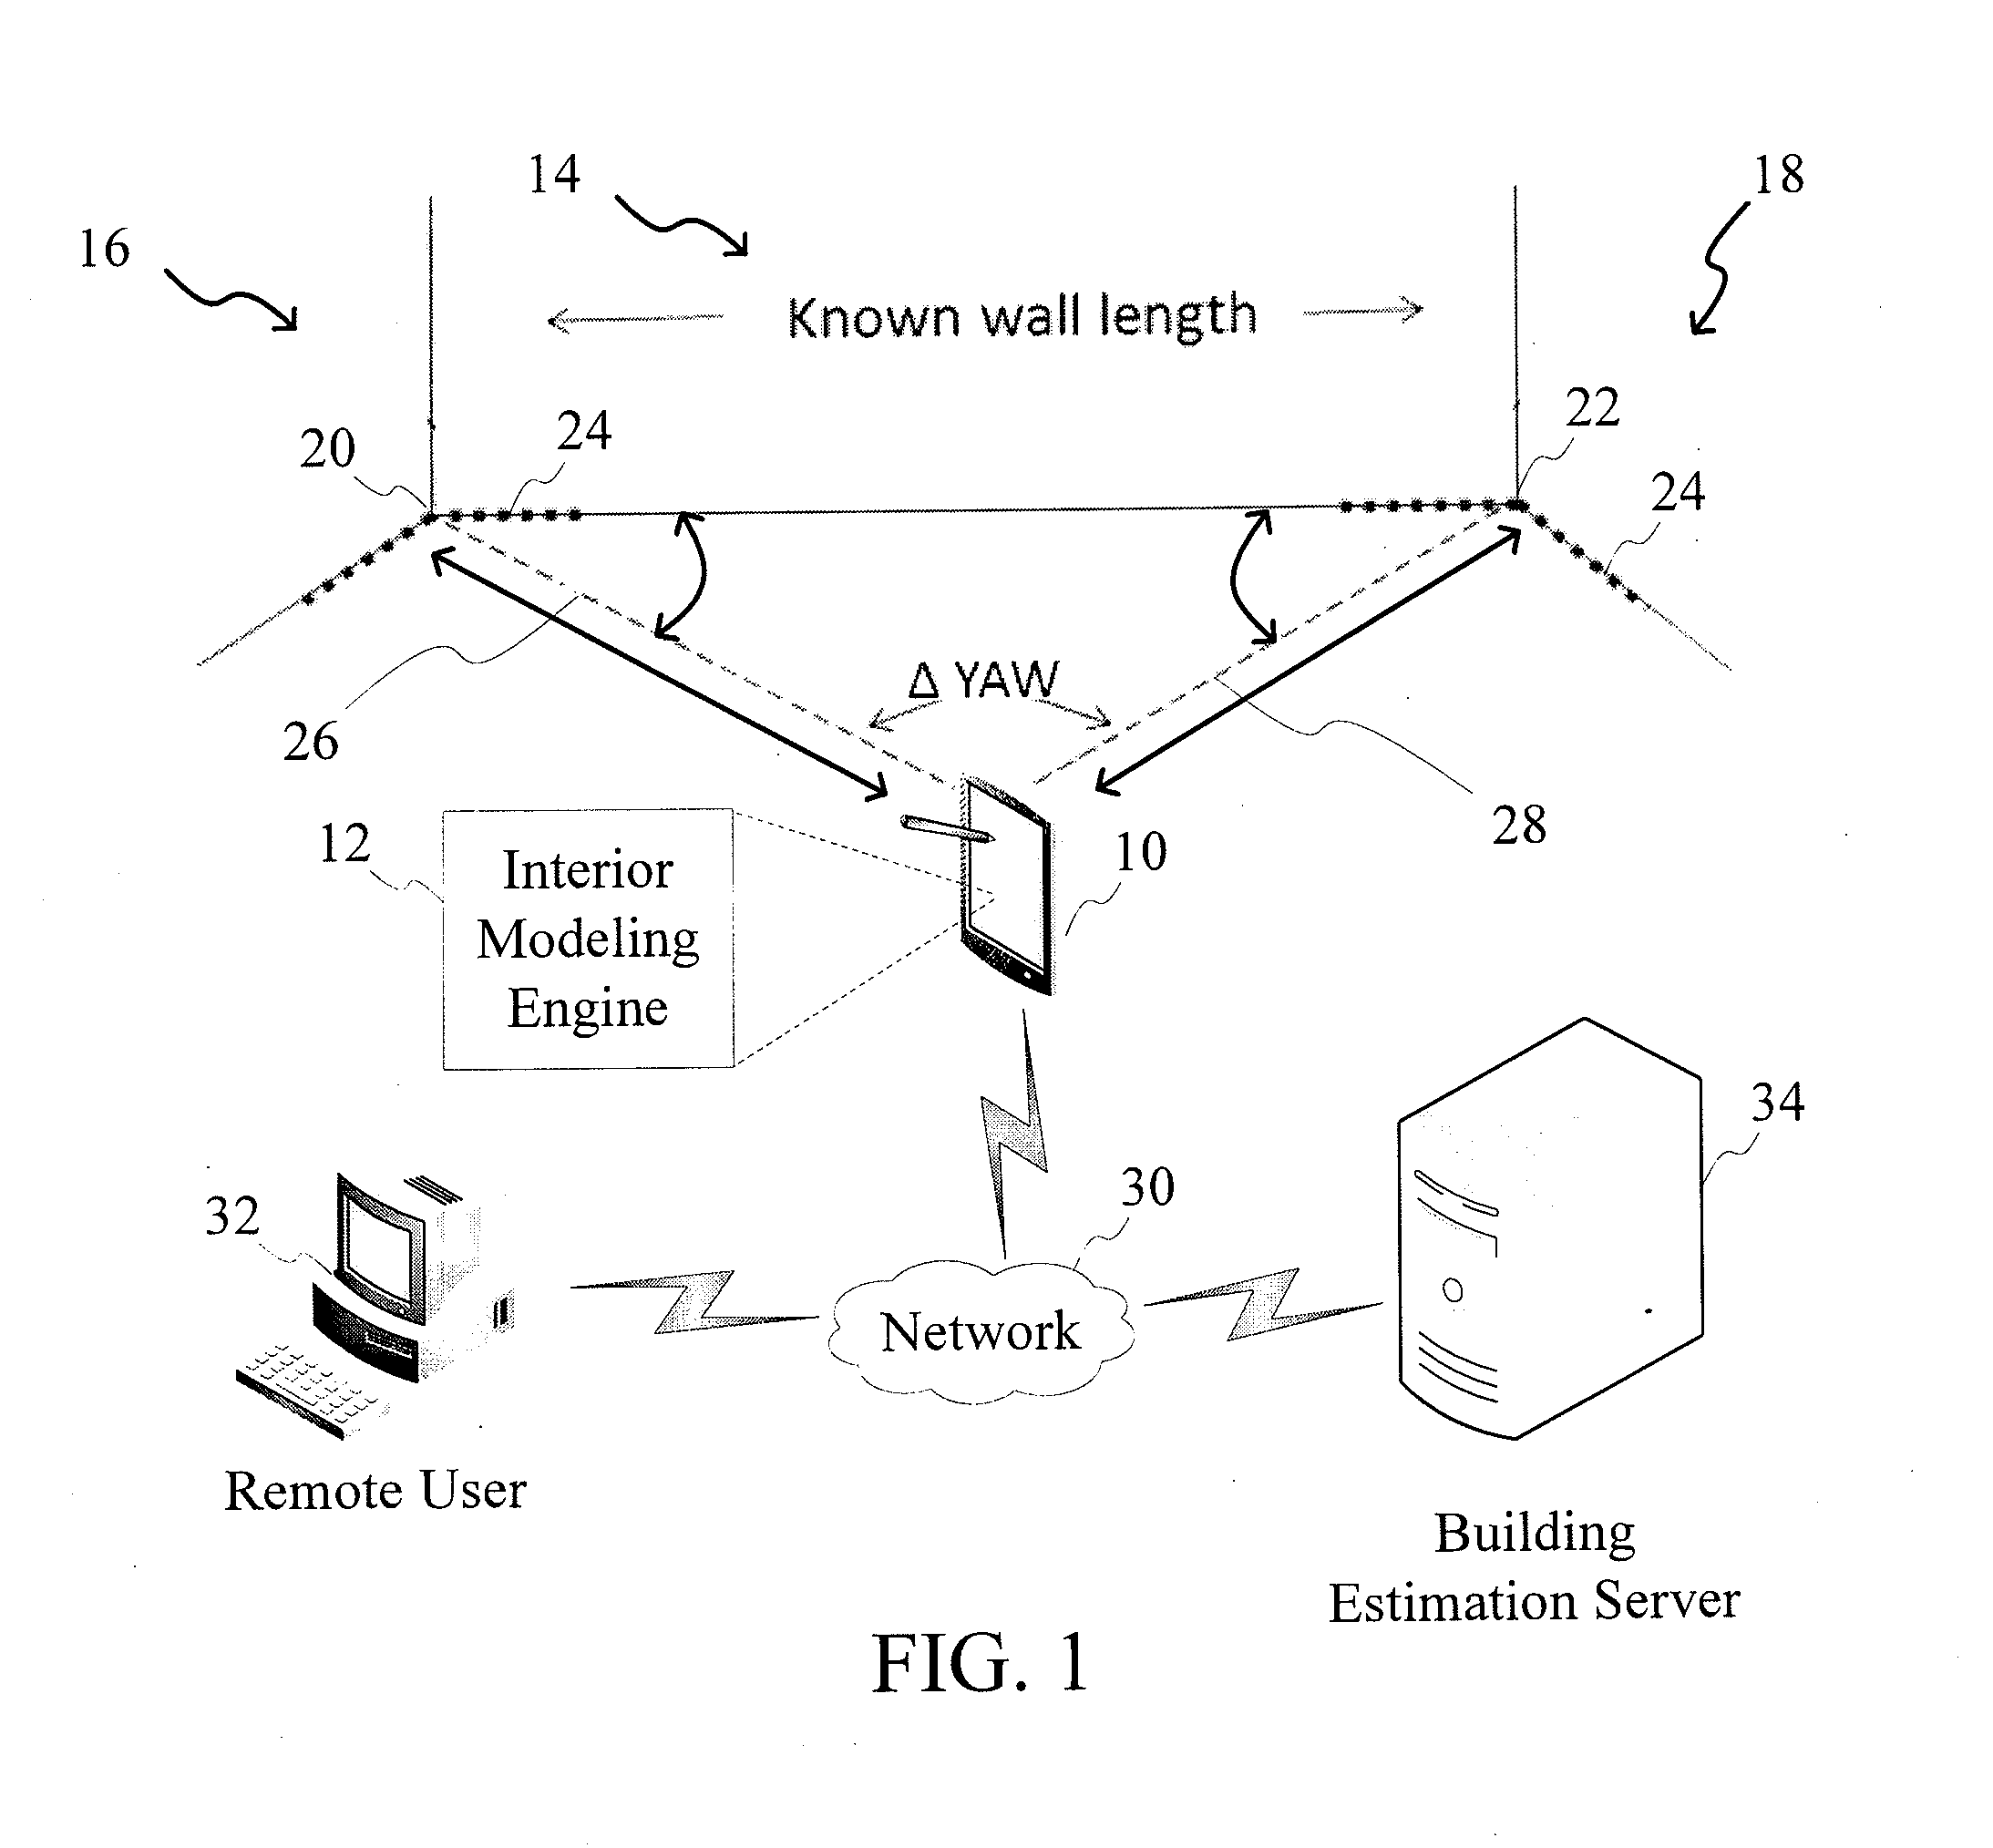 System and Method for Generating Computerized Floor Plans